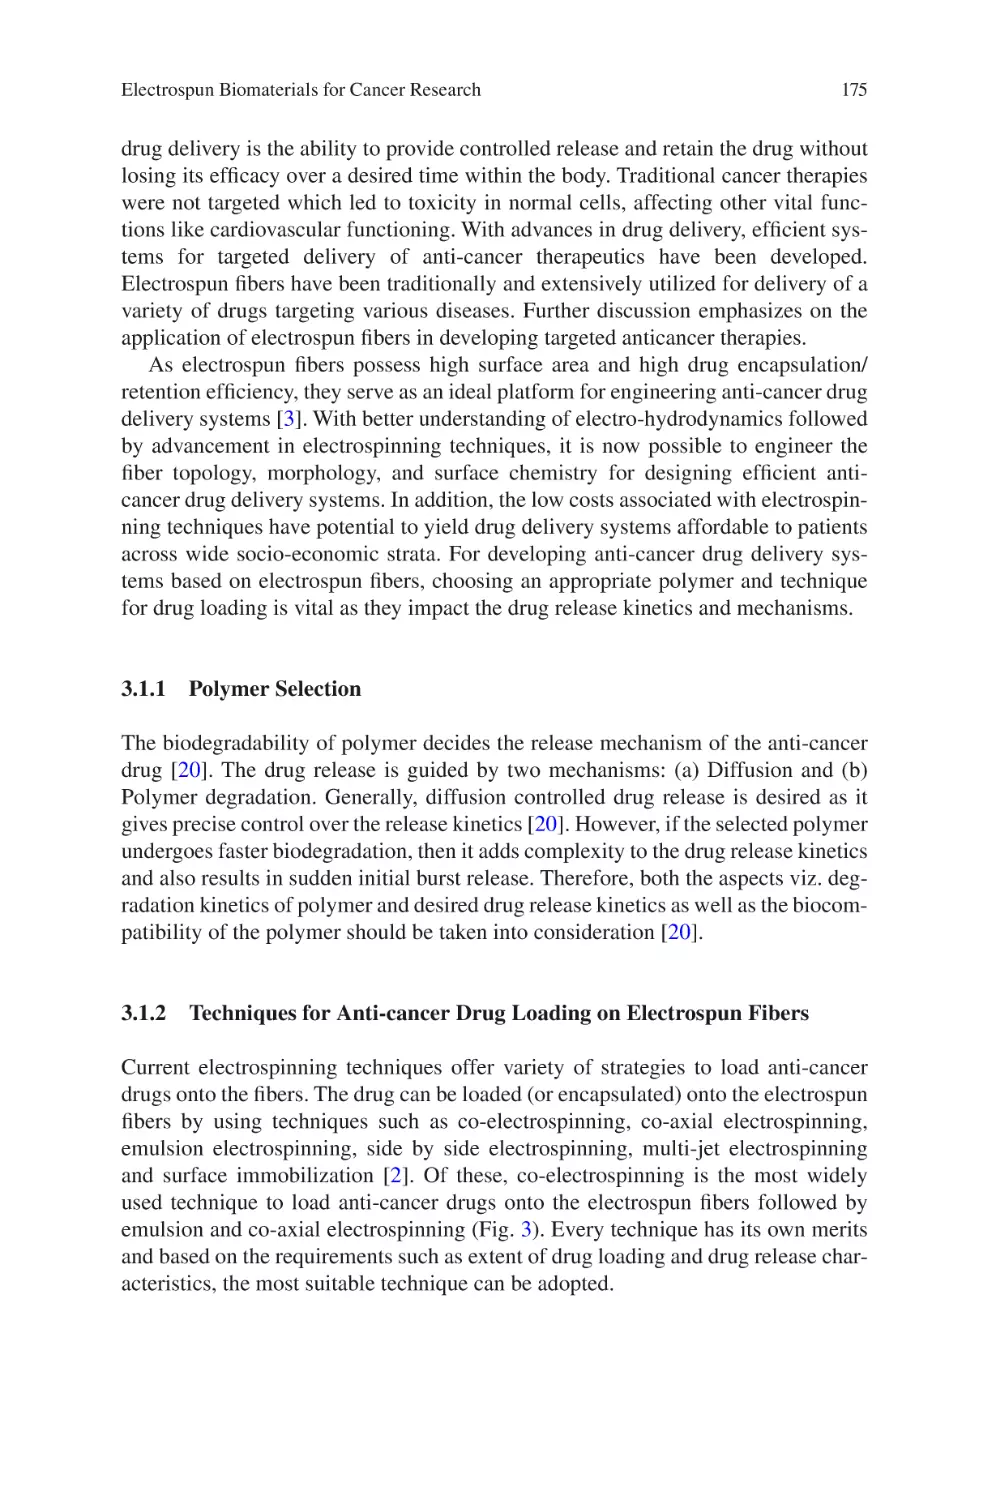 3.1.1 Polymer Selection
3.1.2 Techniques for Anti-cancer Drug Loading on Electrospun Fibers